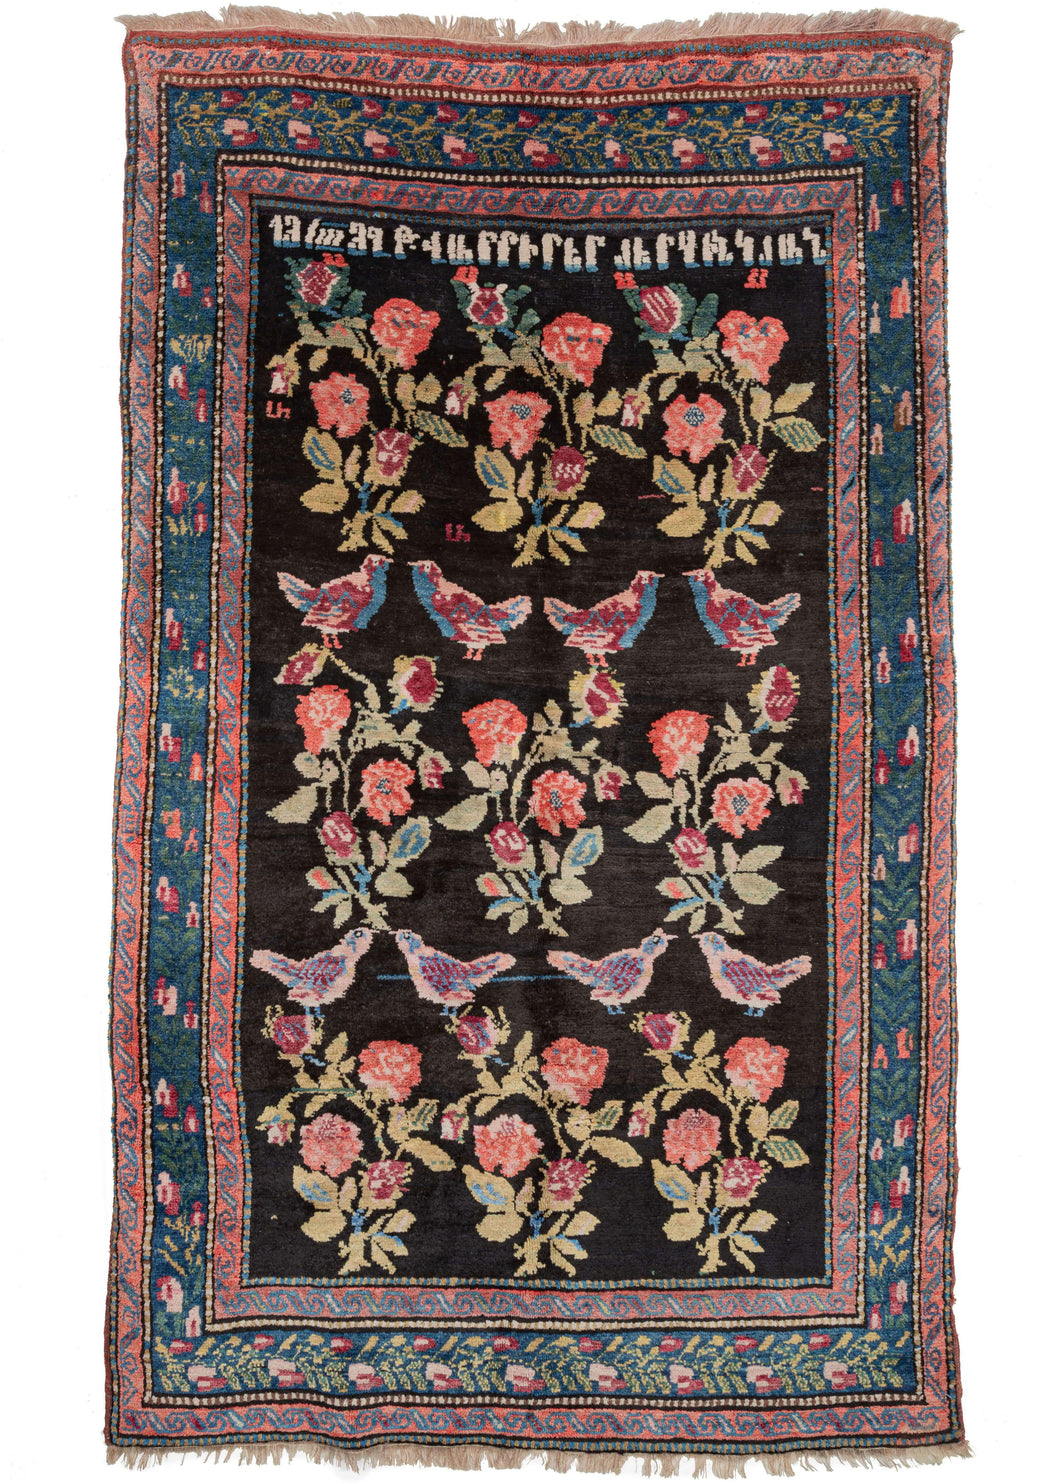 Antique Caucasian Armenian Karabagh area rug featuring a design of partridges and cabbage roses floating above a deep black field.  An inscription featuring a name and date in Armenian at the top:  